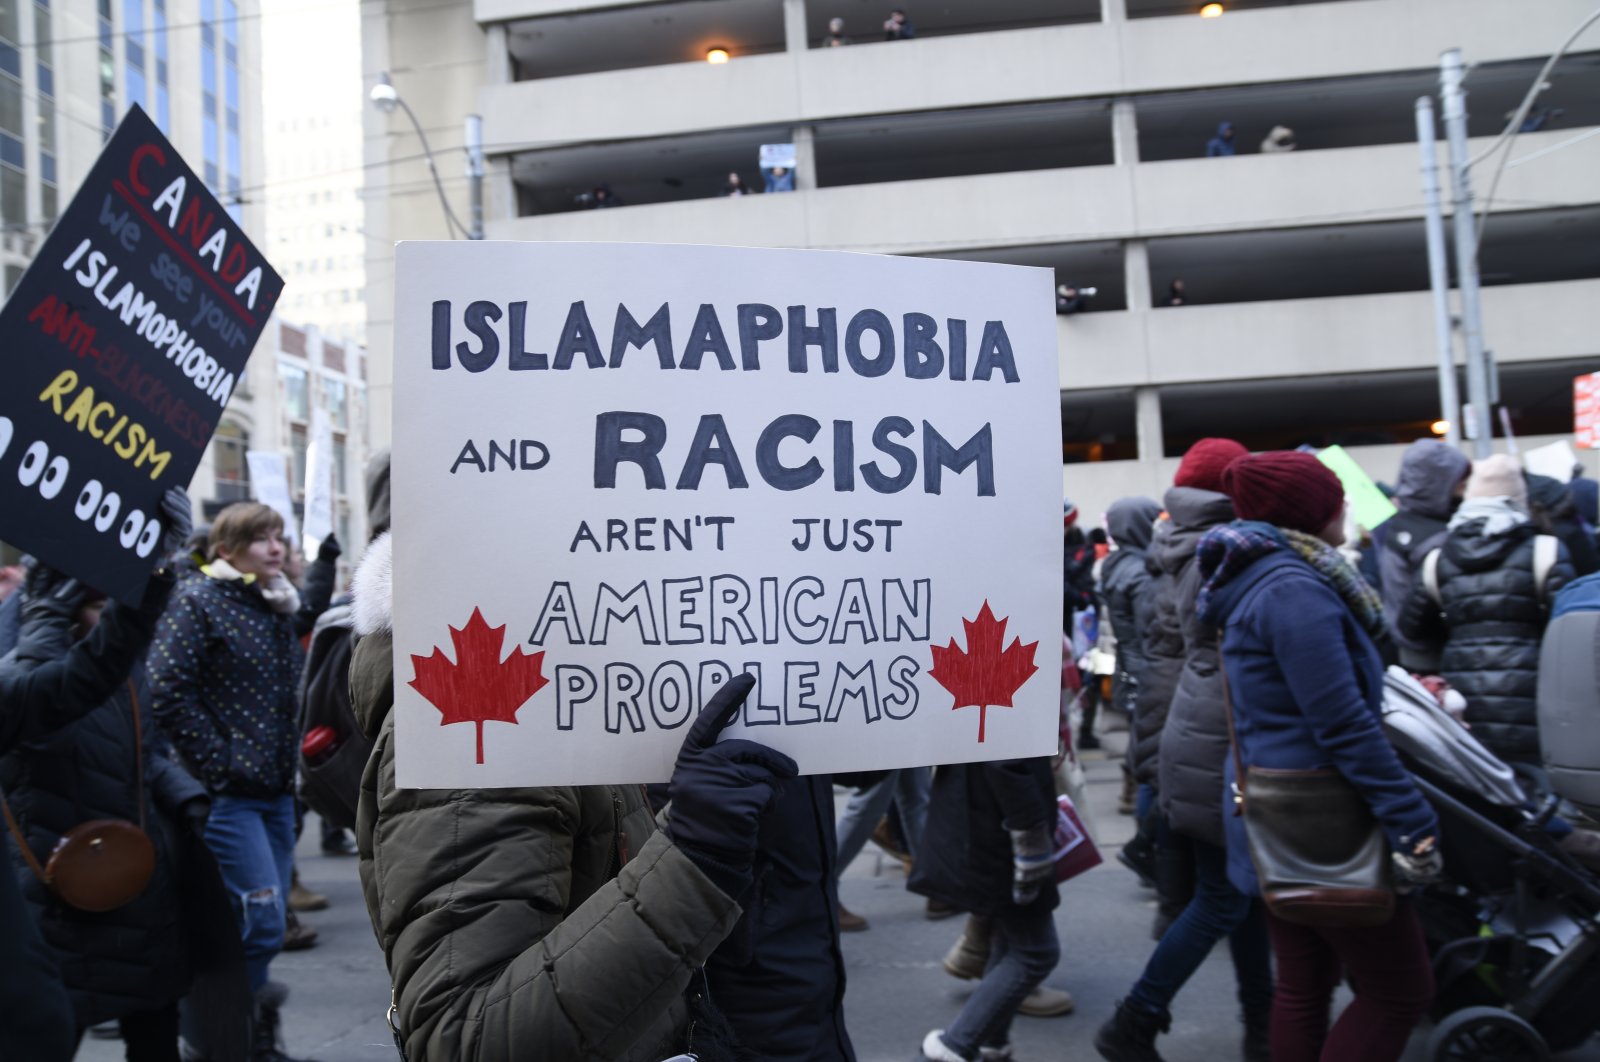 People with posters rejecting racism &amp; Islamophobia during a protest in front of the U.S. Consulate in Toronto to denounce Trump&#039;s immigration policies on Feb. 4, 2017. (Shutterstock File Photo)